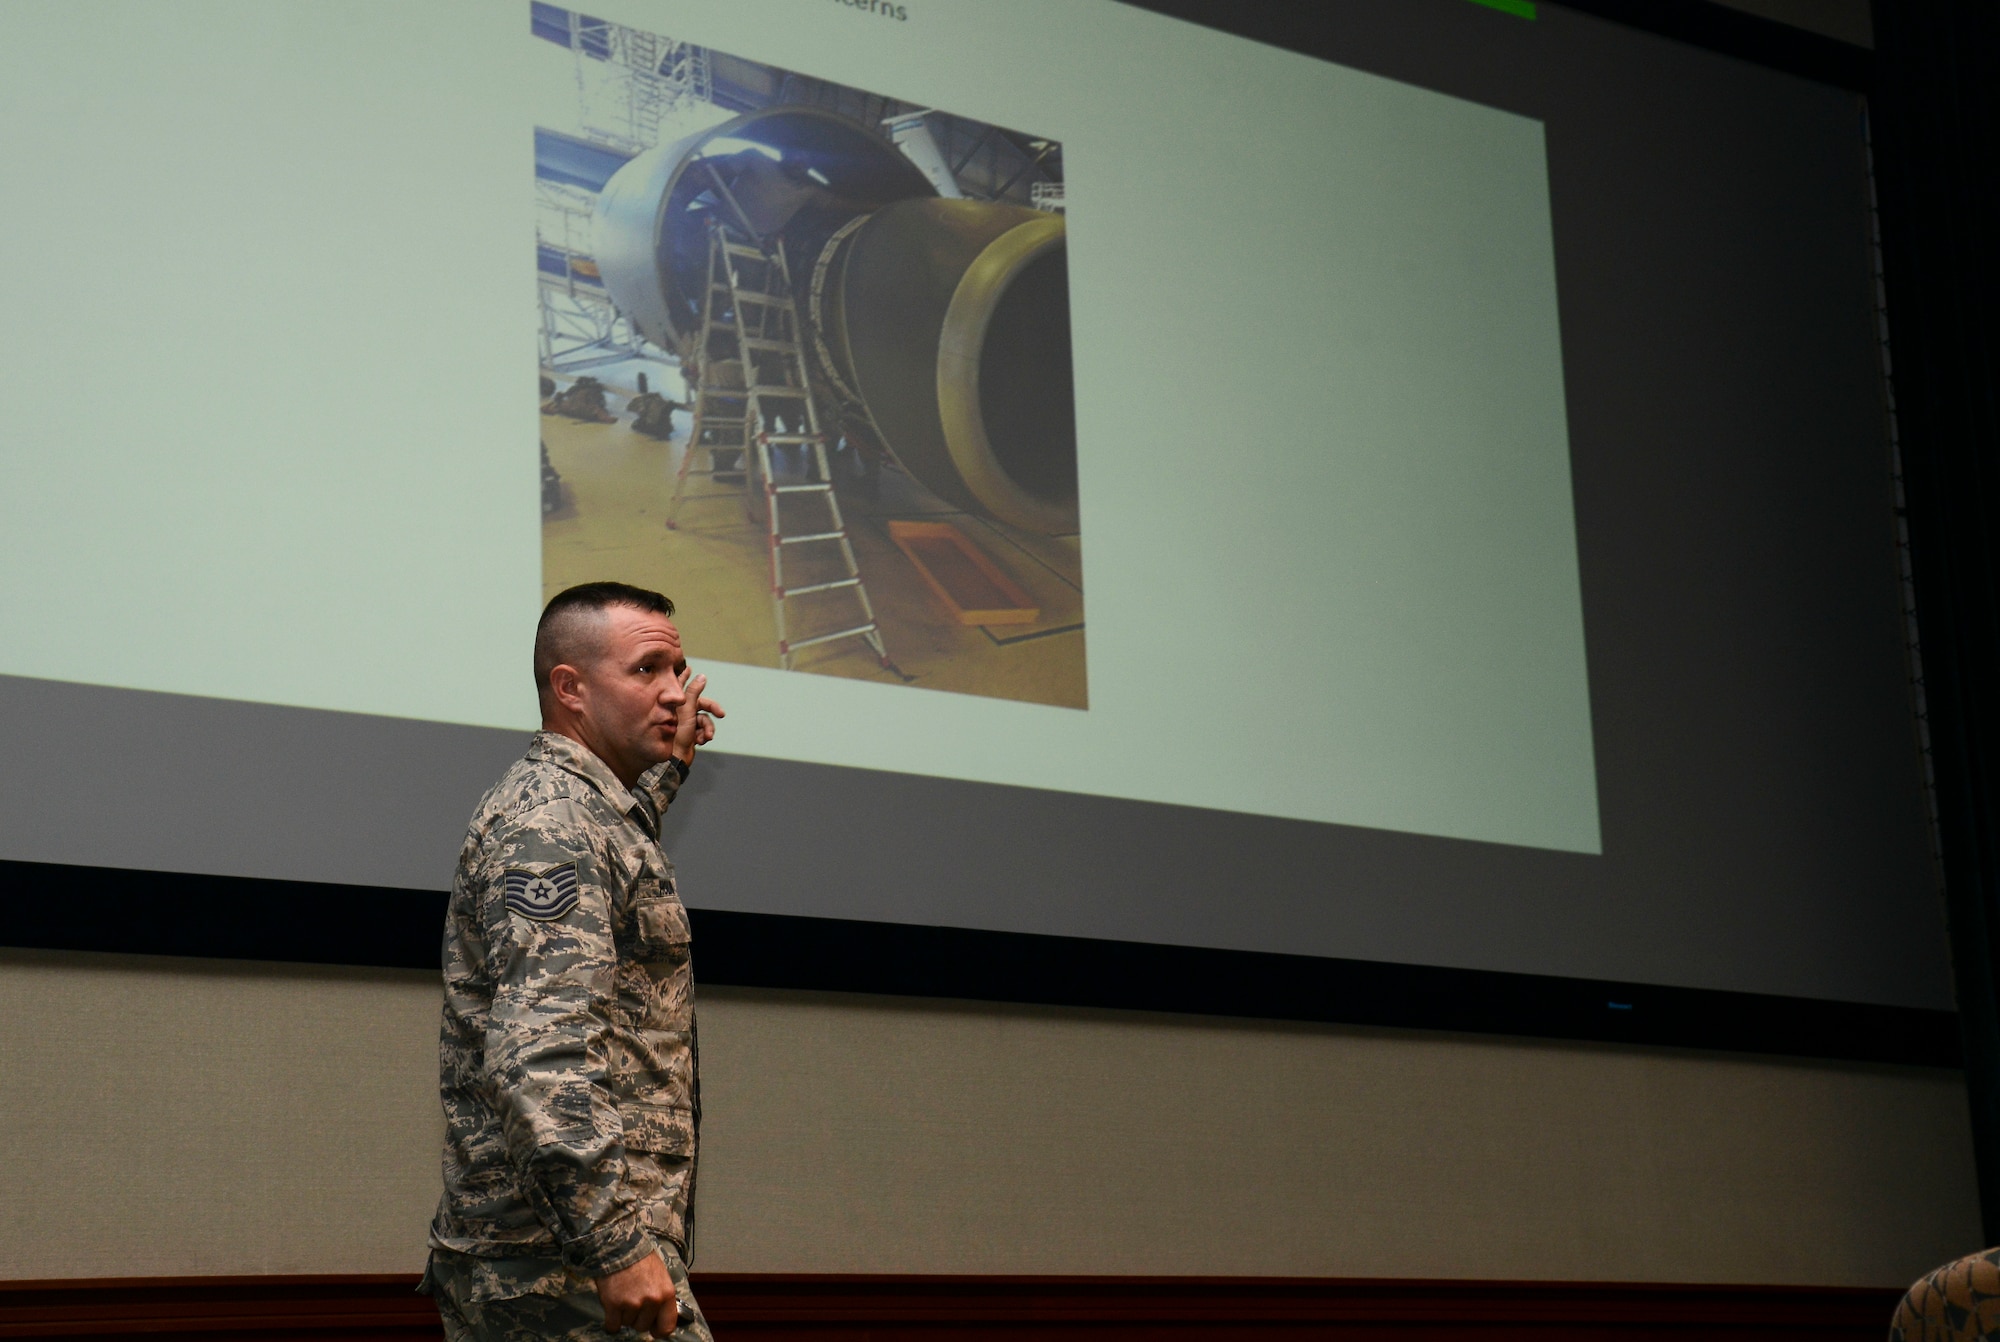 U.S. Air Force Tech. Sgt. Eric Holston, support section NCO in charge assigned to the 6th Maintenance Squadron, presents his idea for an F-108 engine maintenance stand during Fuel Tank at MacDill Air Force Base, Fla., June 27, 2018.